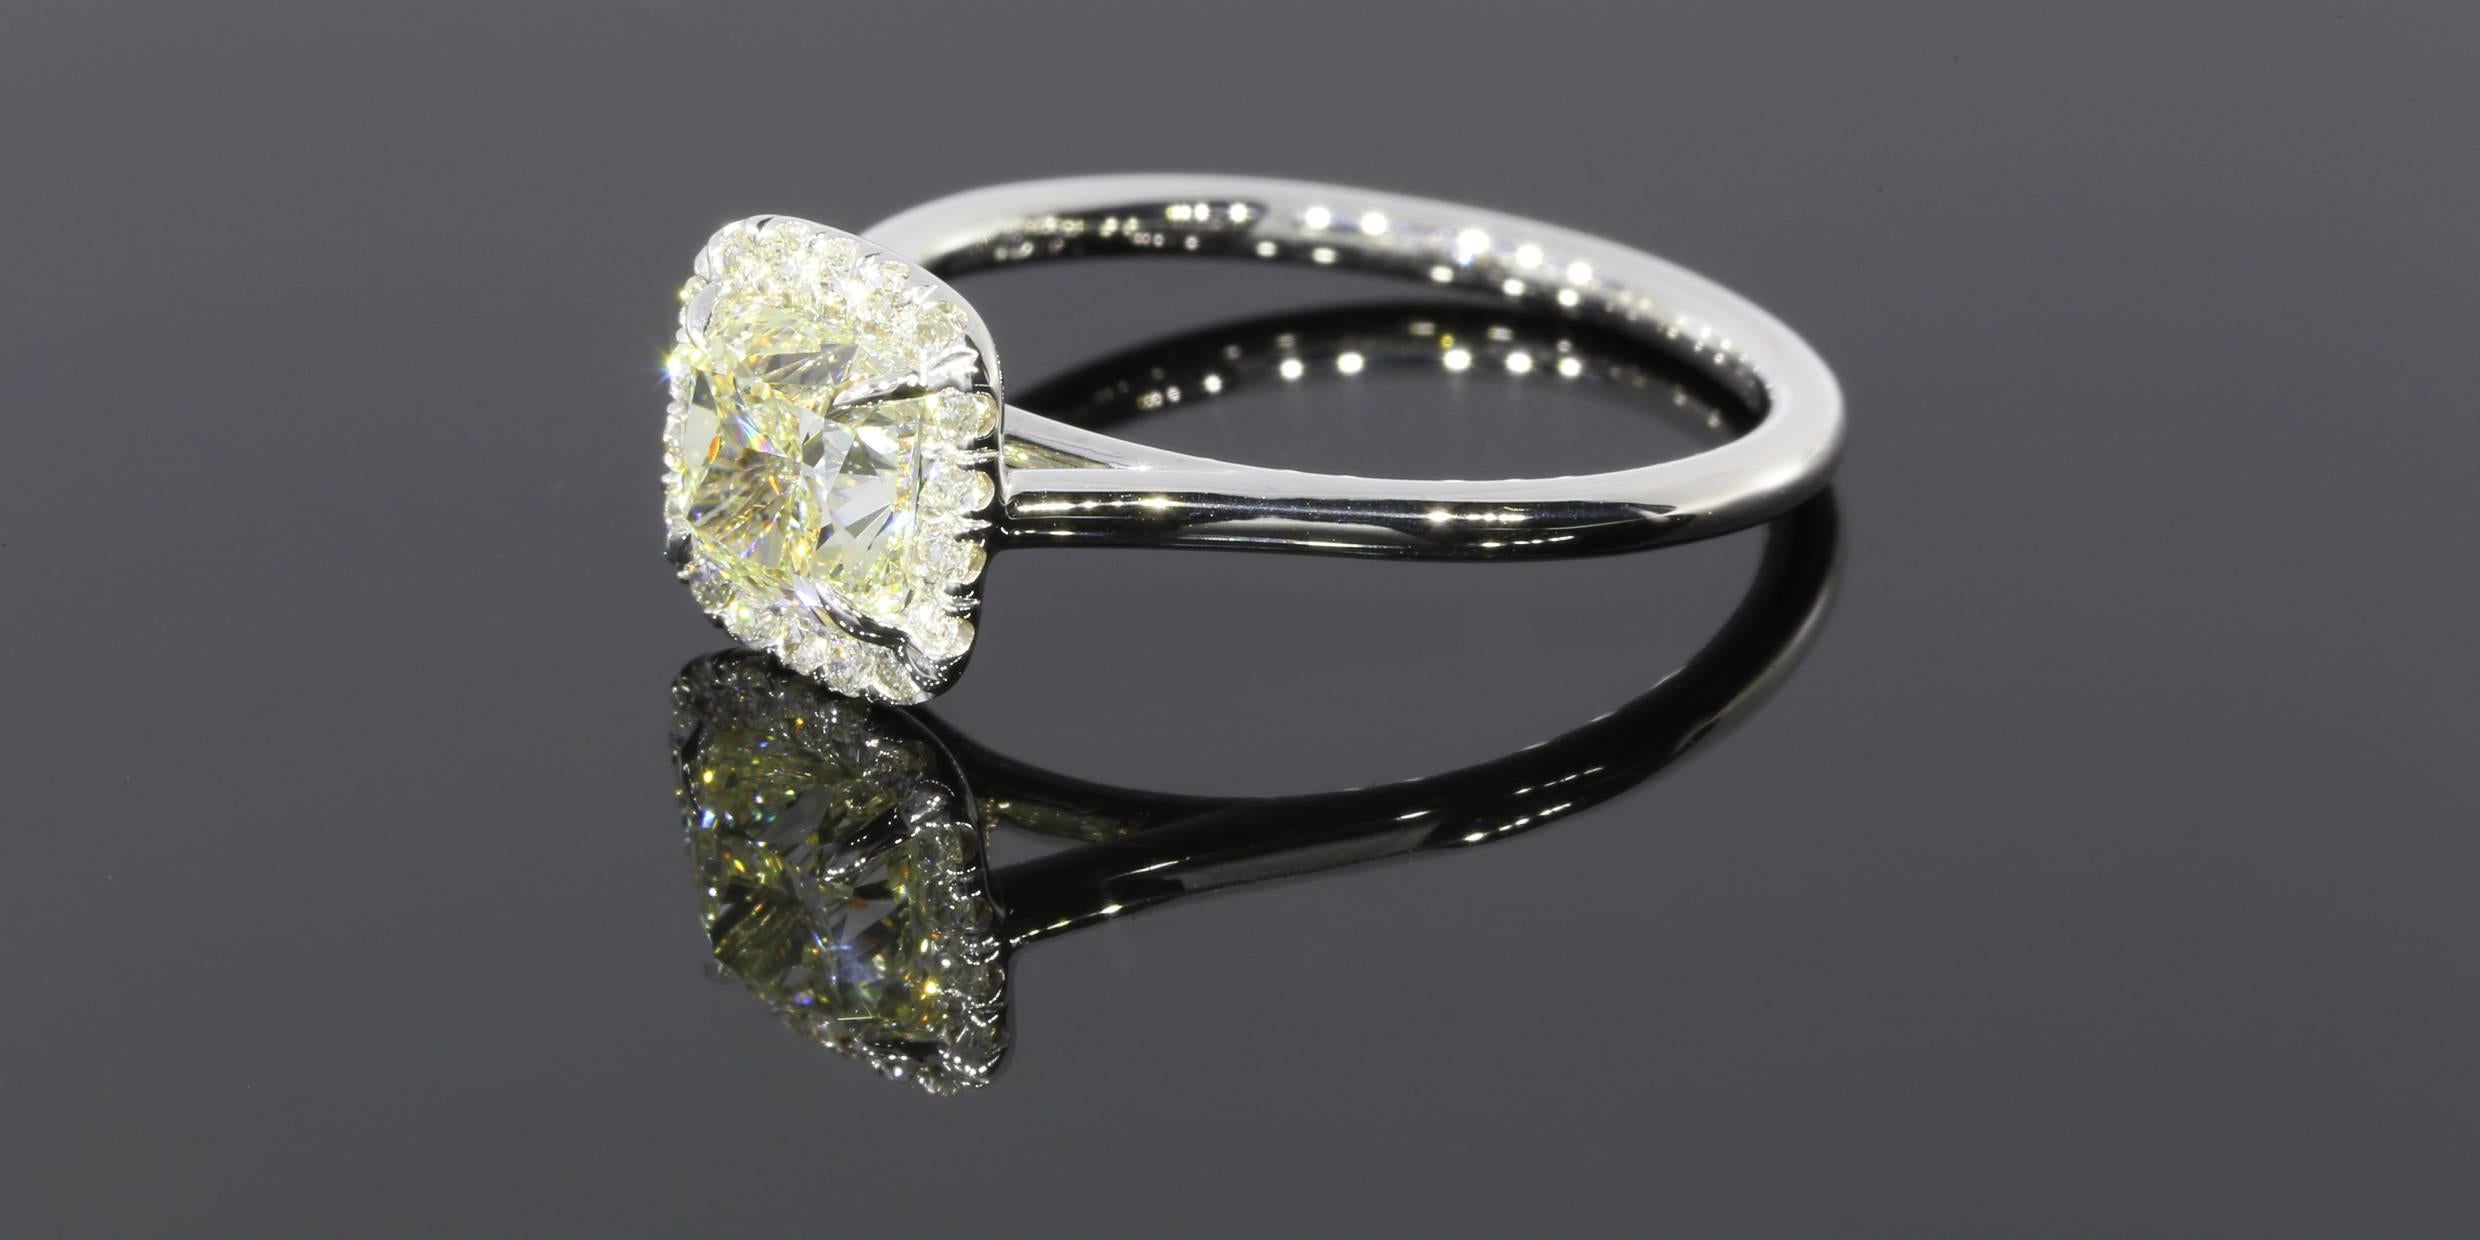 Cushion shaped diamonds are a great mix of the sparkle of a round brilliant and the sophistication of a princess shape, which has made them very popular with brides to be. The center stone in this beautiful engagement ring is a 1.20 carat, cushion